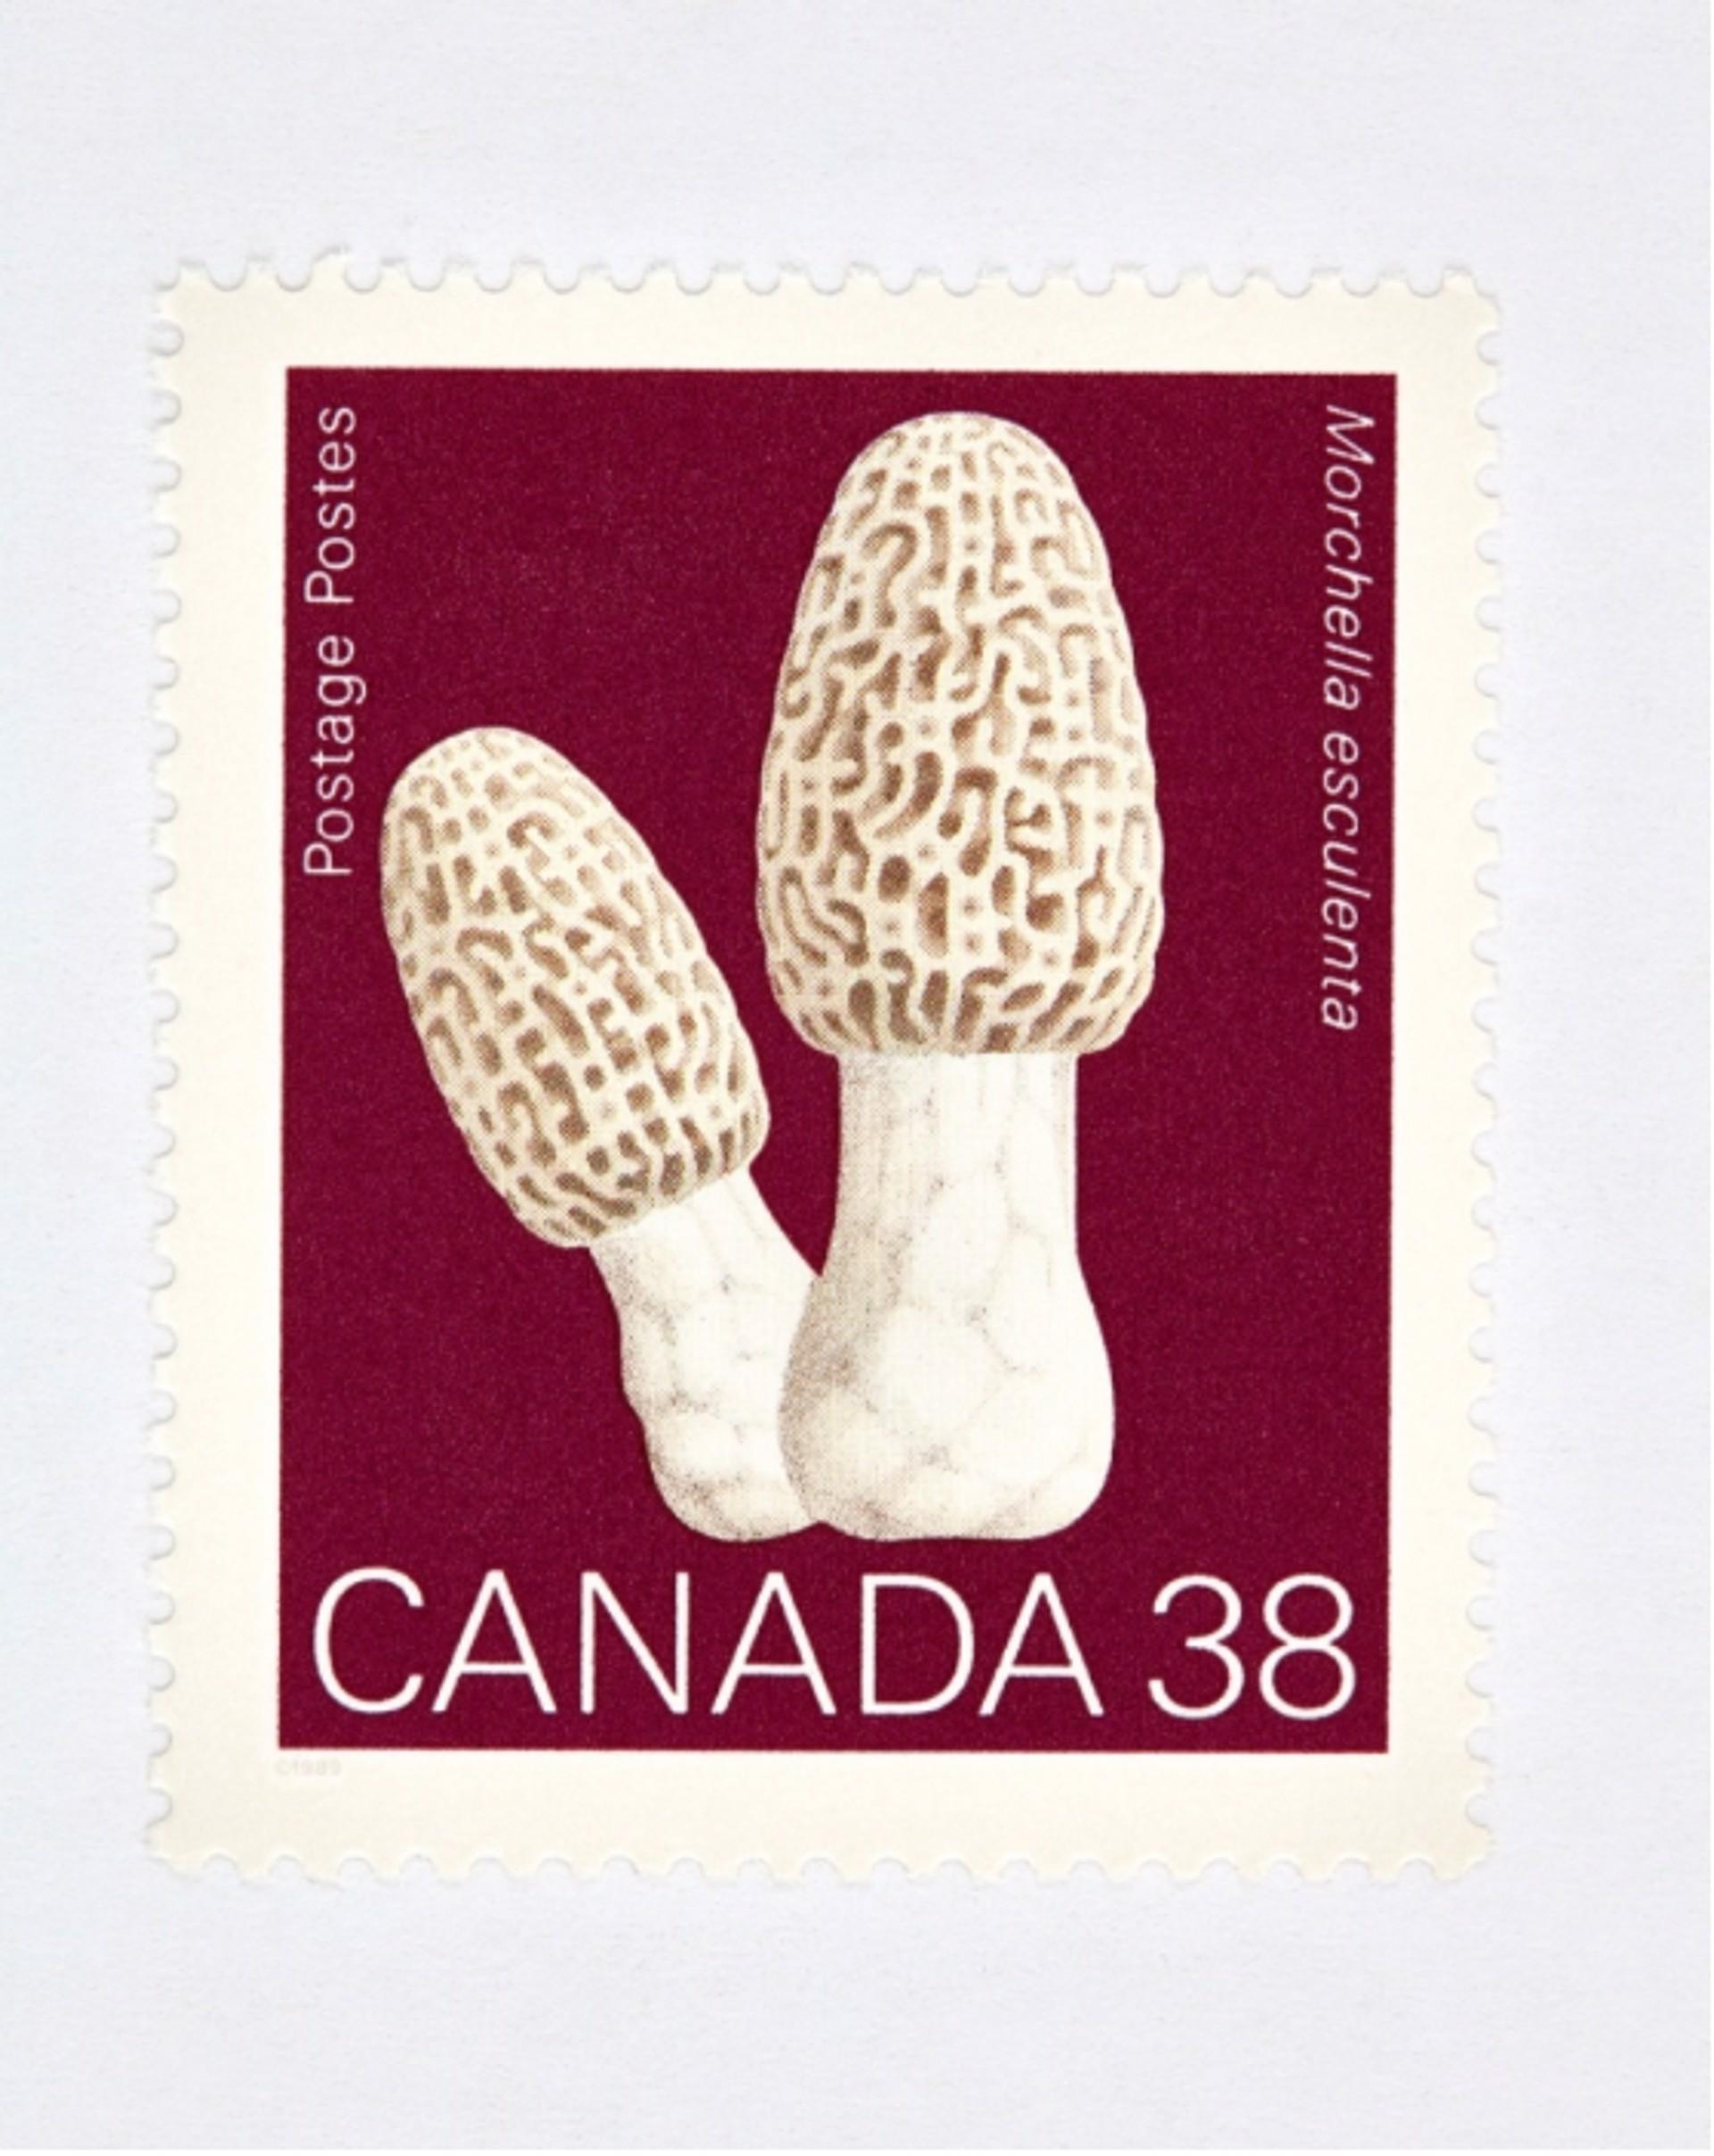 Canada 38 Mushroom (Red) 
Digital C-Print / Archival Pigment Print
Edition of 20 per size
Available sizes:
36 x 27

“Collectible” series is a macro level exploration of coins, bills and stamps. These images are created with the intention of being